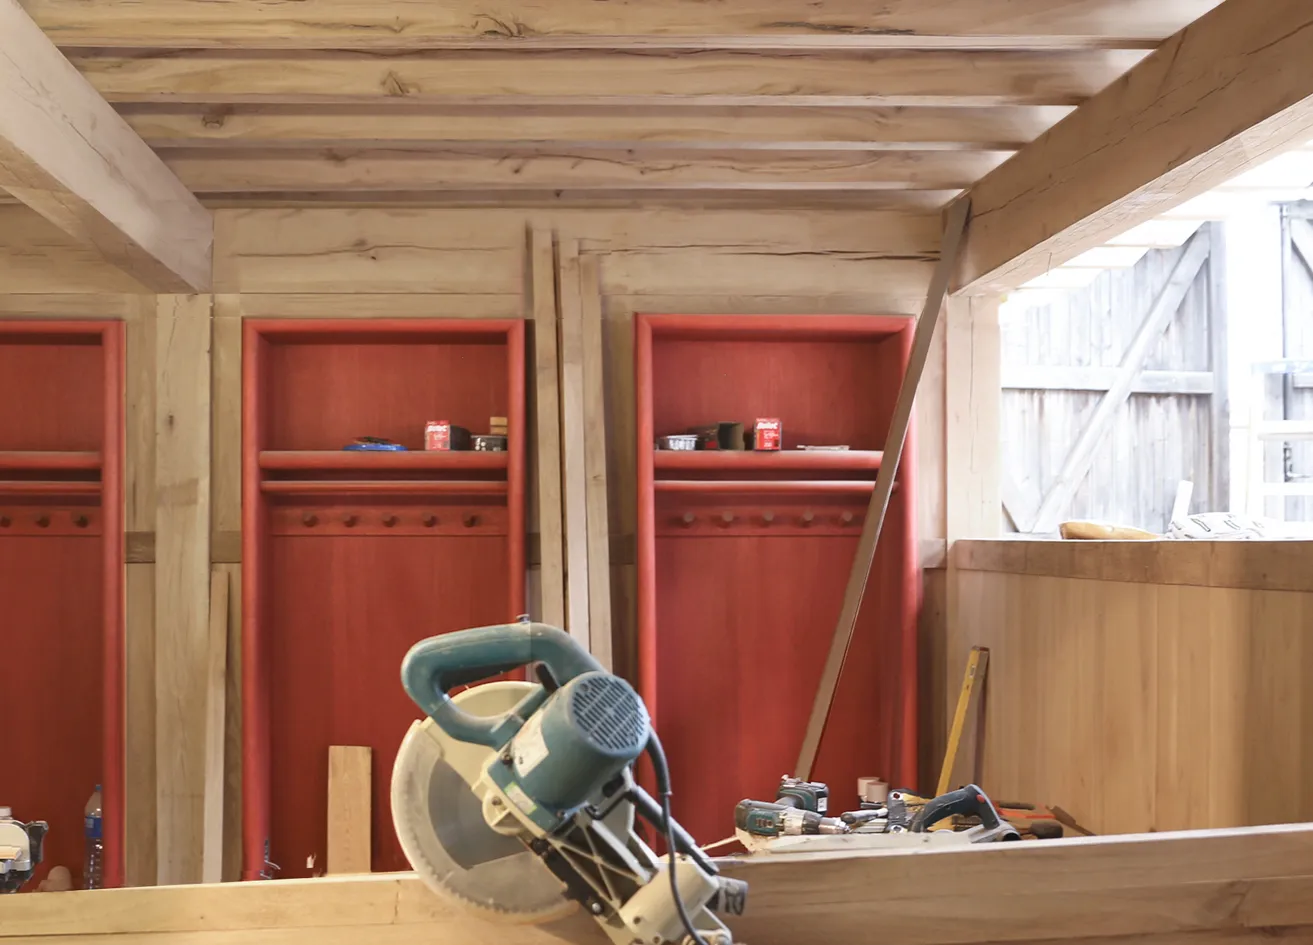 red club lockers within the timber structure